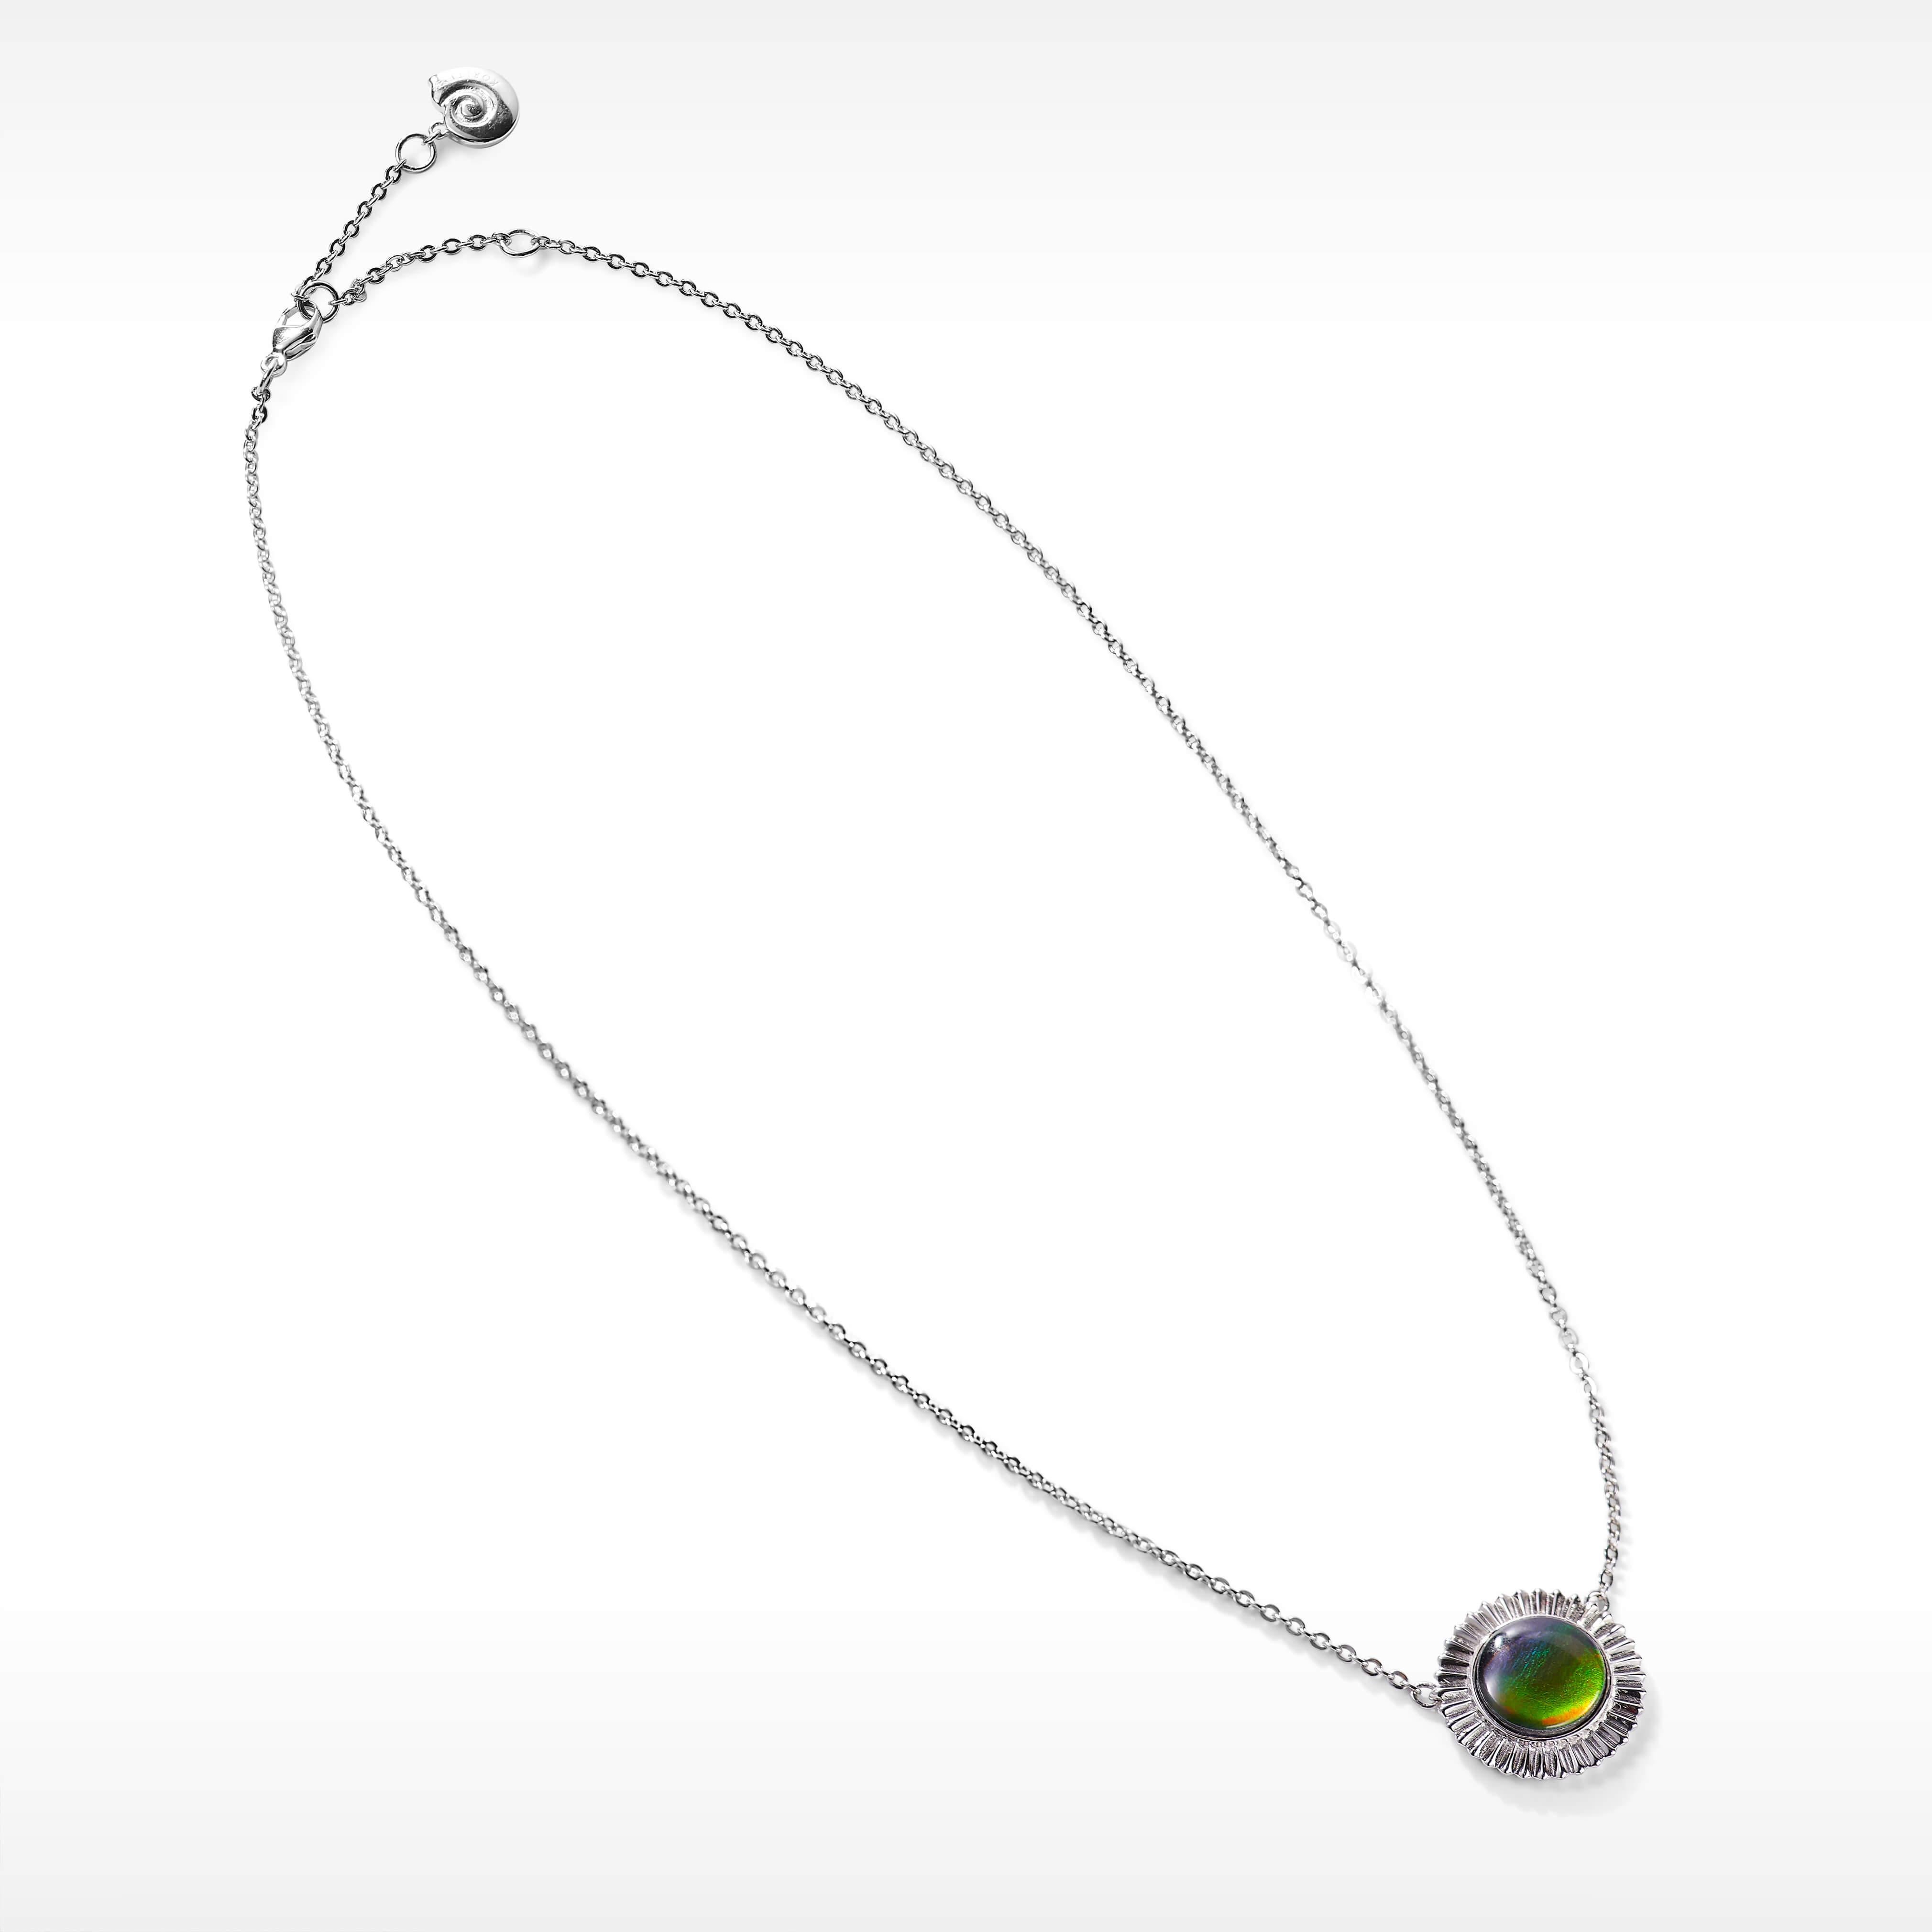 Product Details:

The Origins collection features bold Ammolite showpieces highlighting organic textures inspired by our ammonite roots.

A grade Ammolite
11mm round Ammolite pendant
925 Sterling Silver
Pendant Dimensions: 18.2mm x 18.2mm.
Chain